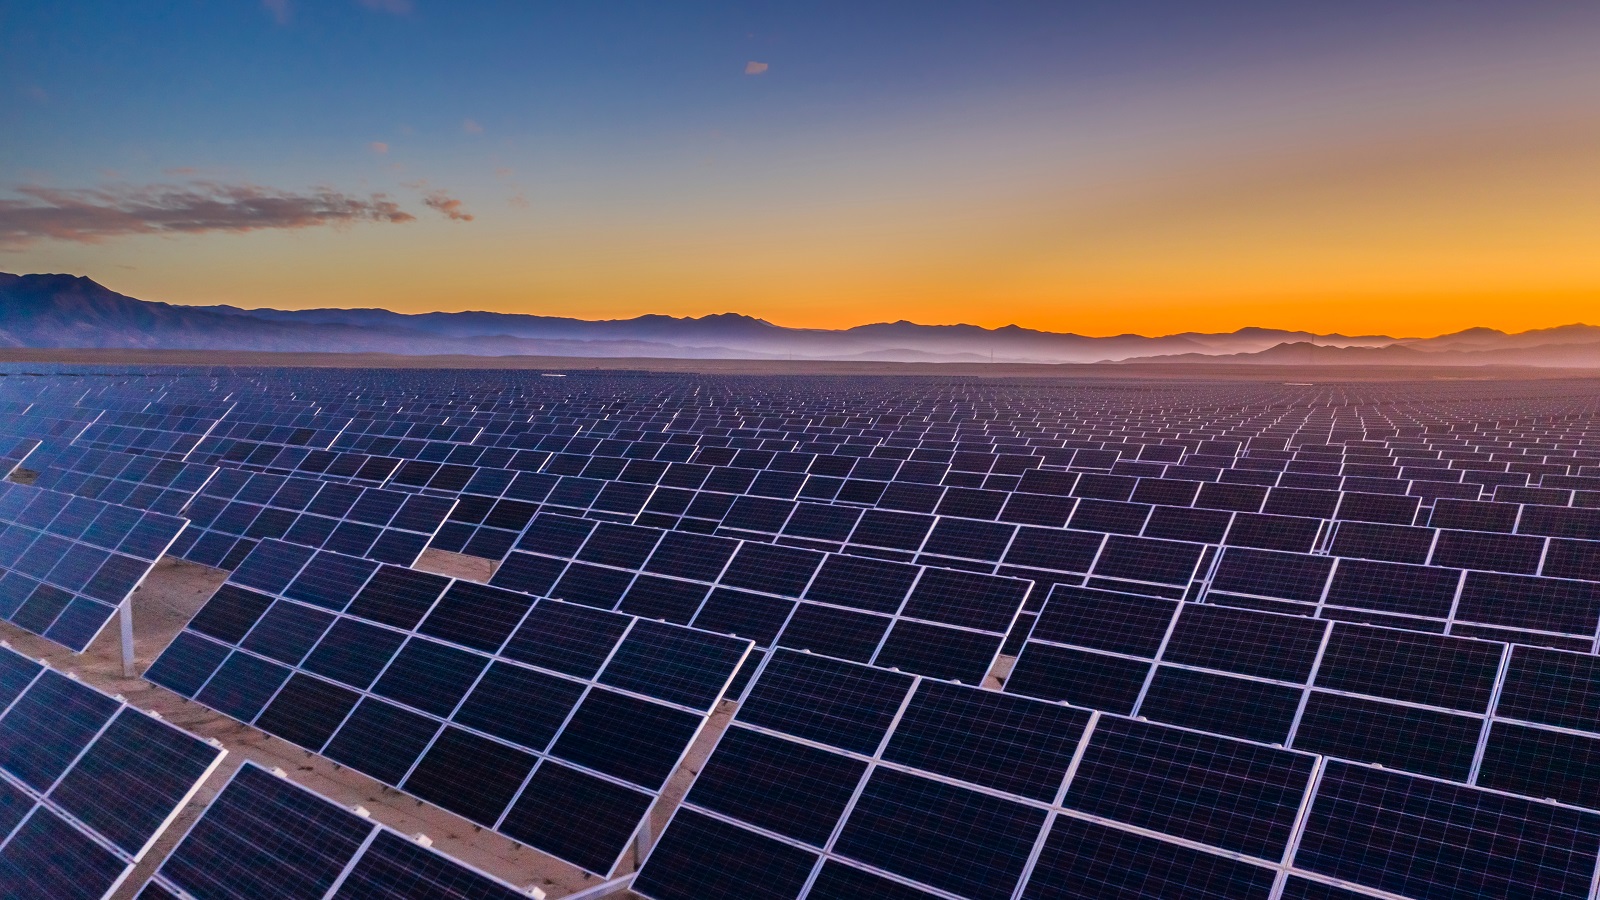 Where is the largest solar park located?